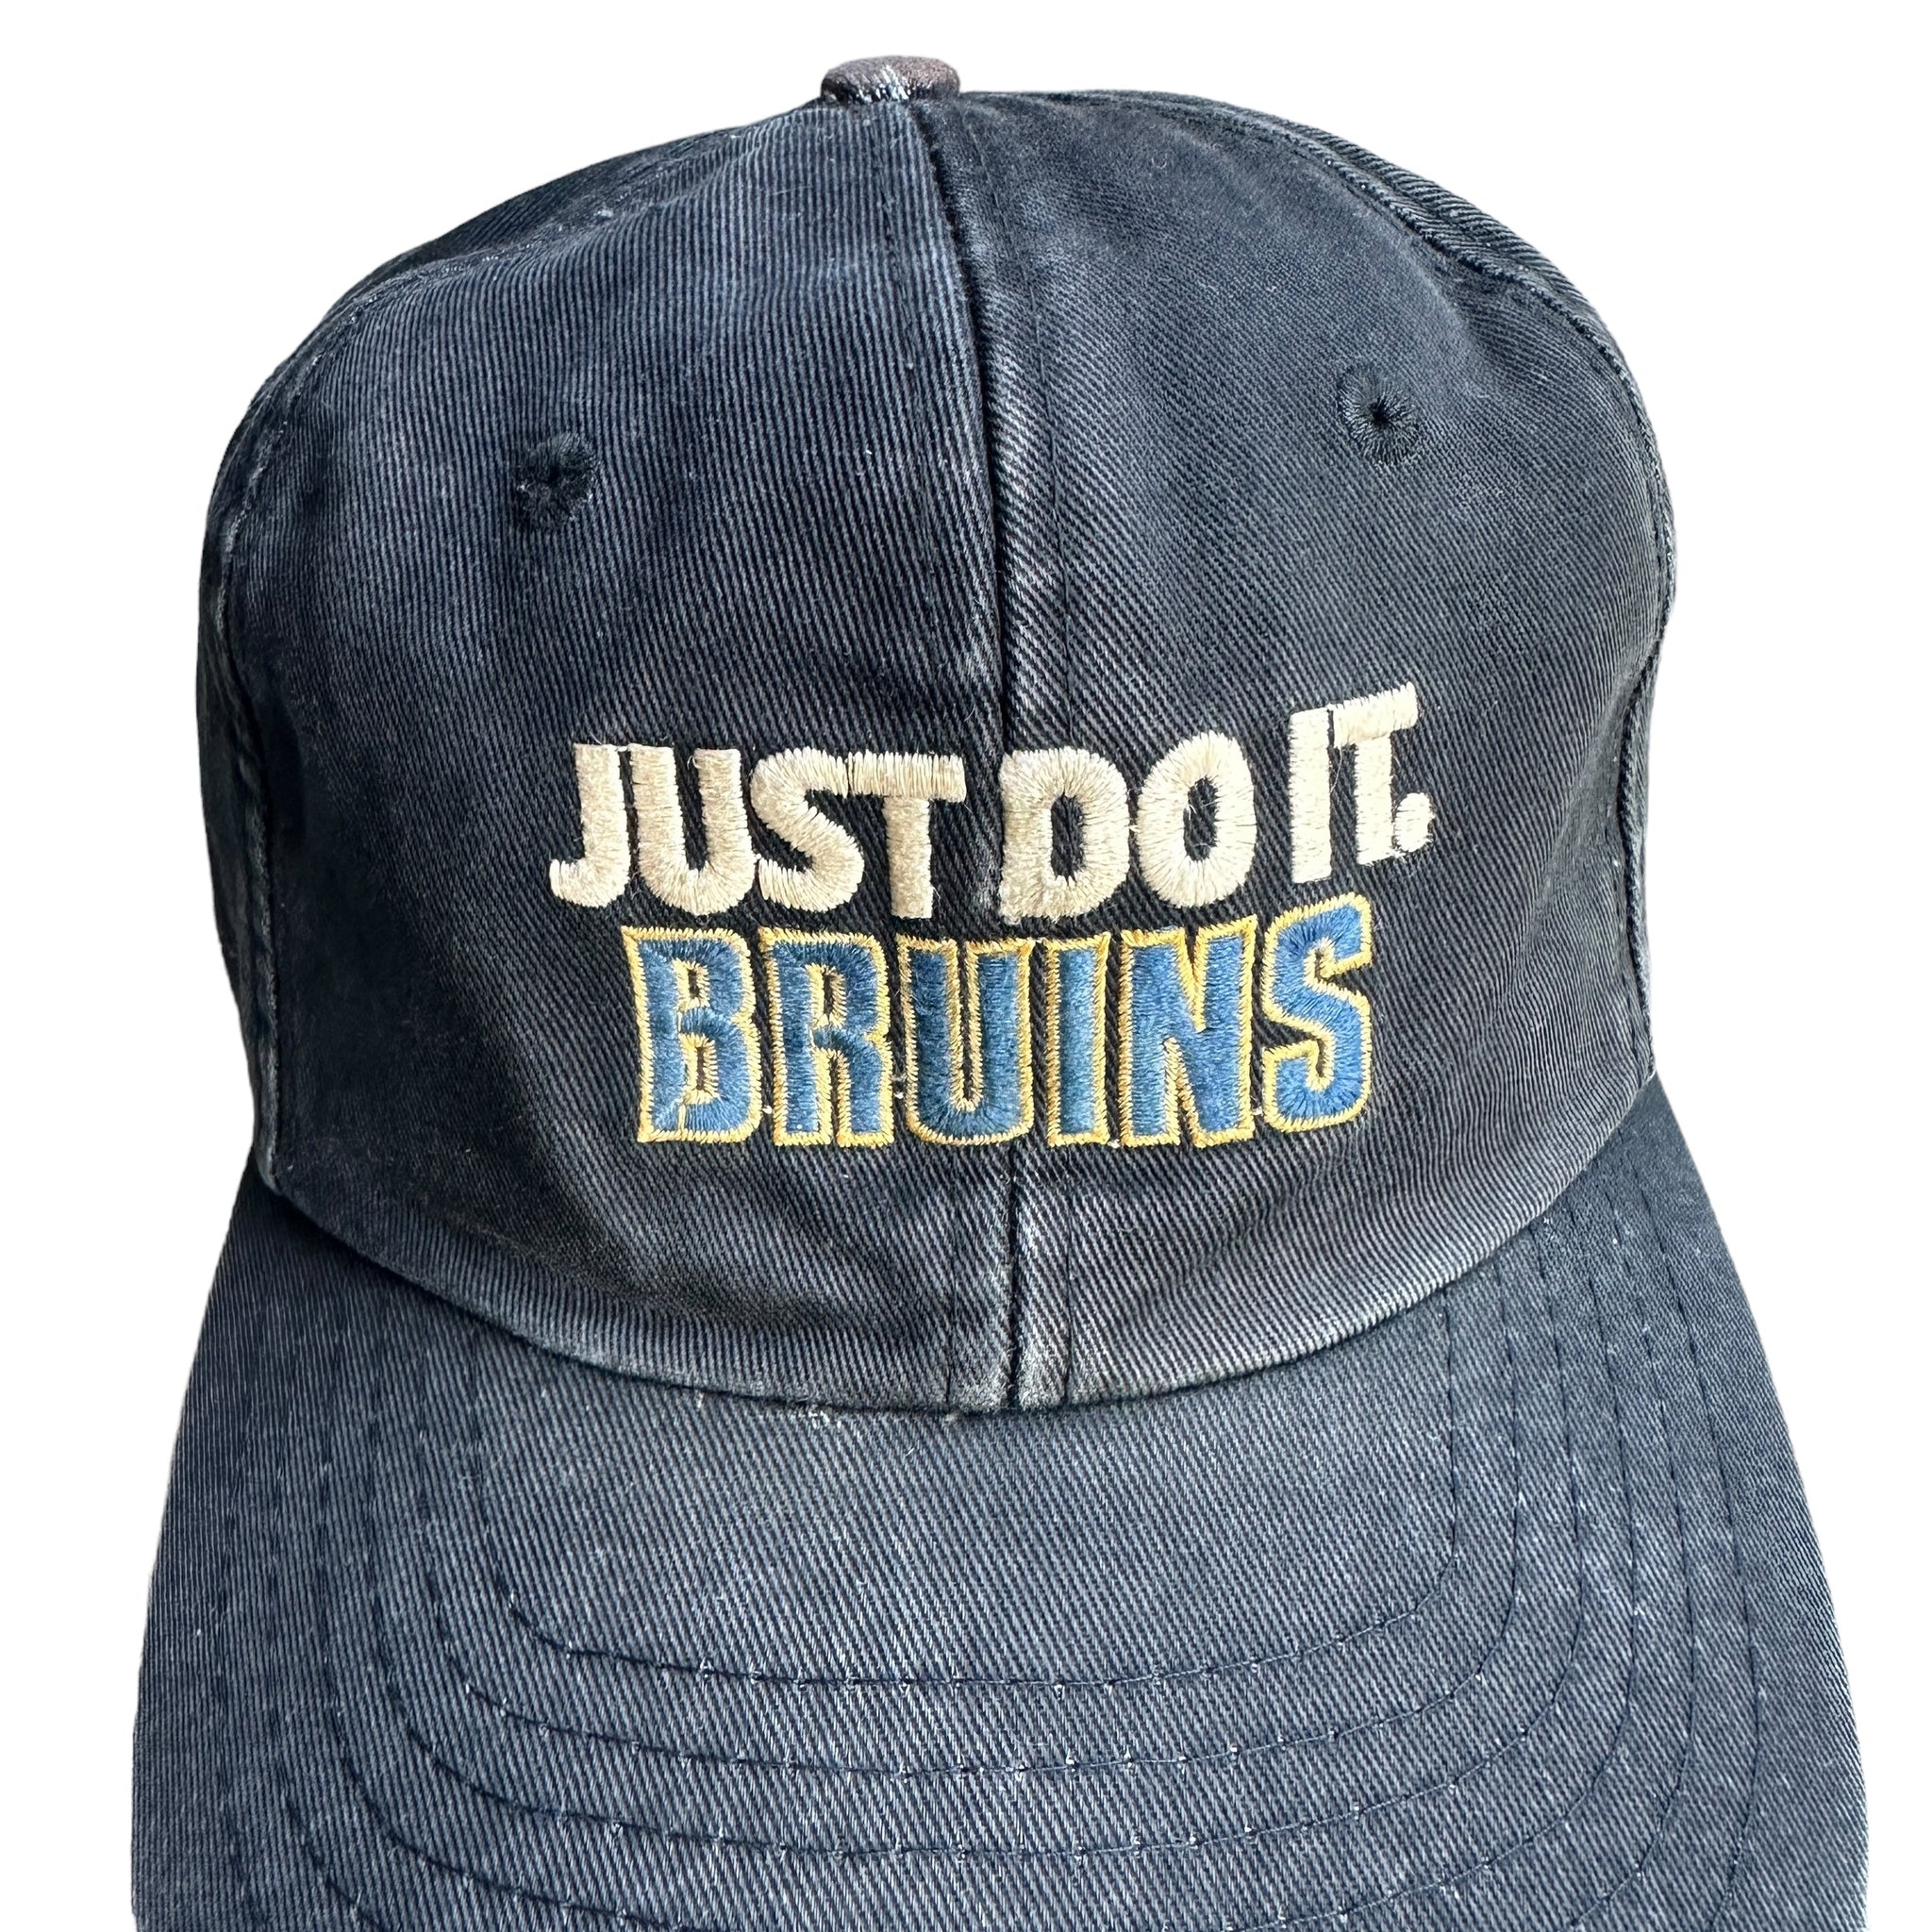 Nike just do it bruins hat